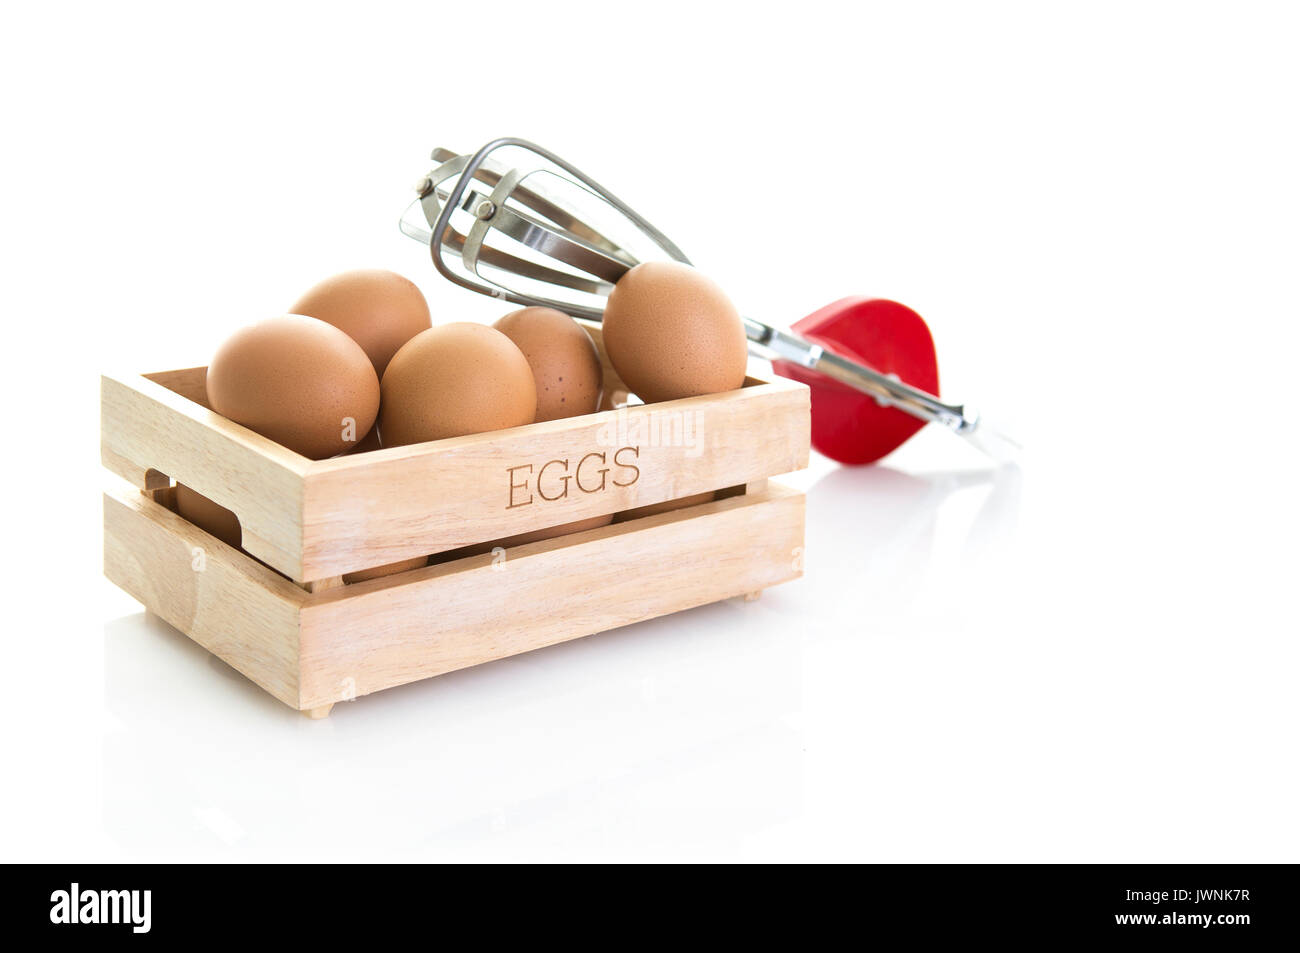 Eggs in a wooden box with old red egg whisk on a white background Stock Photo